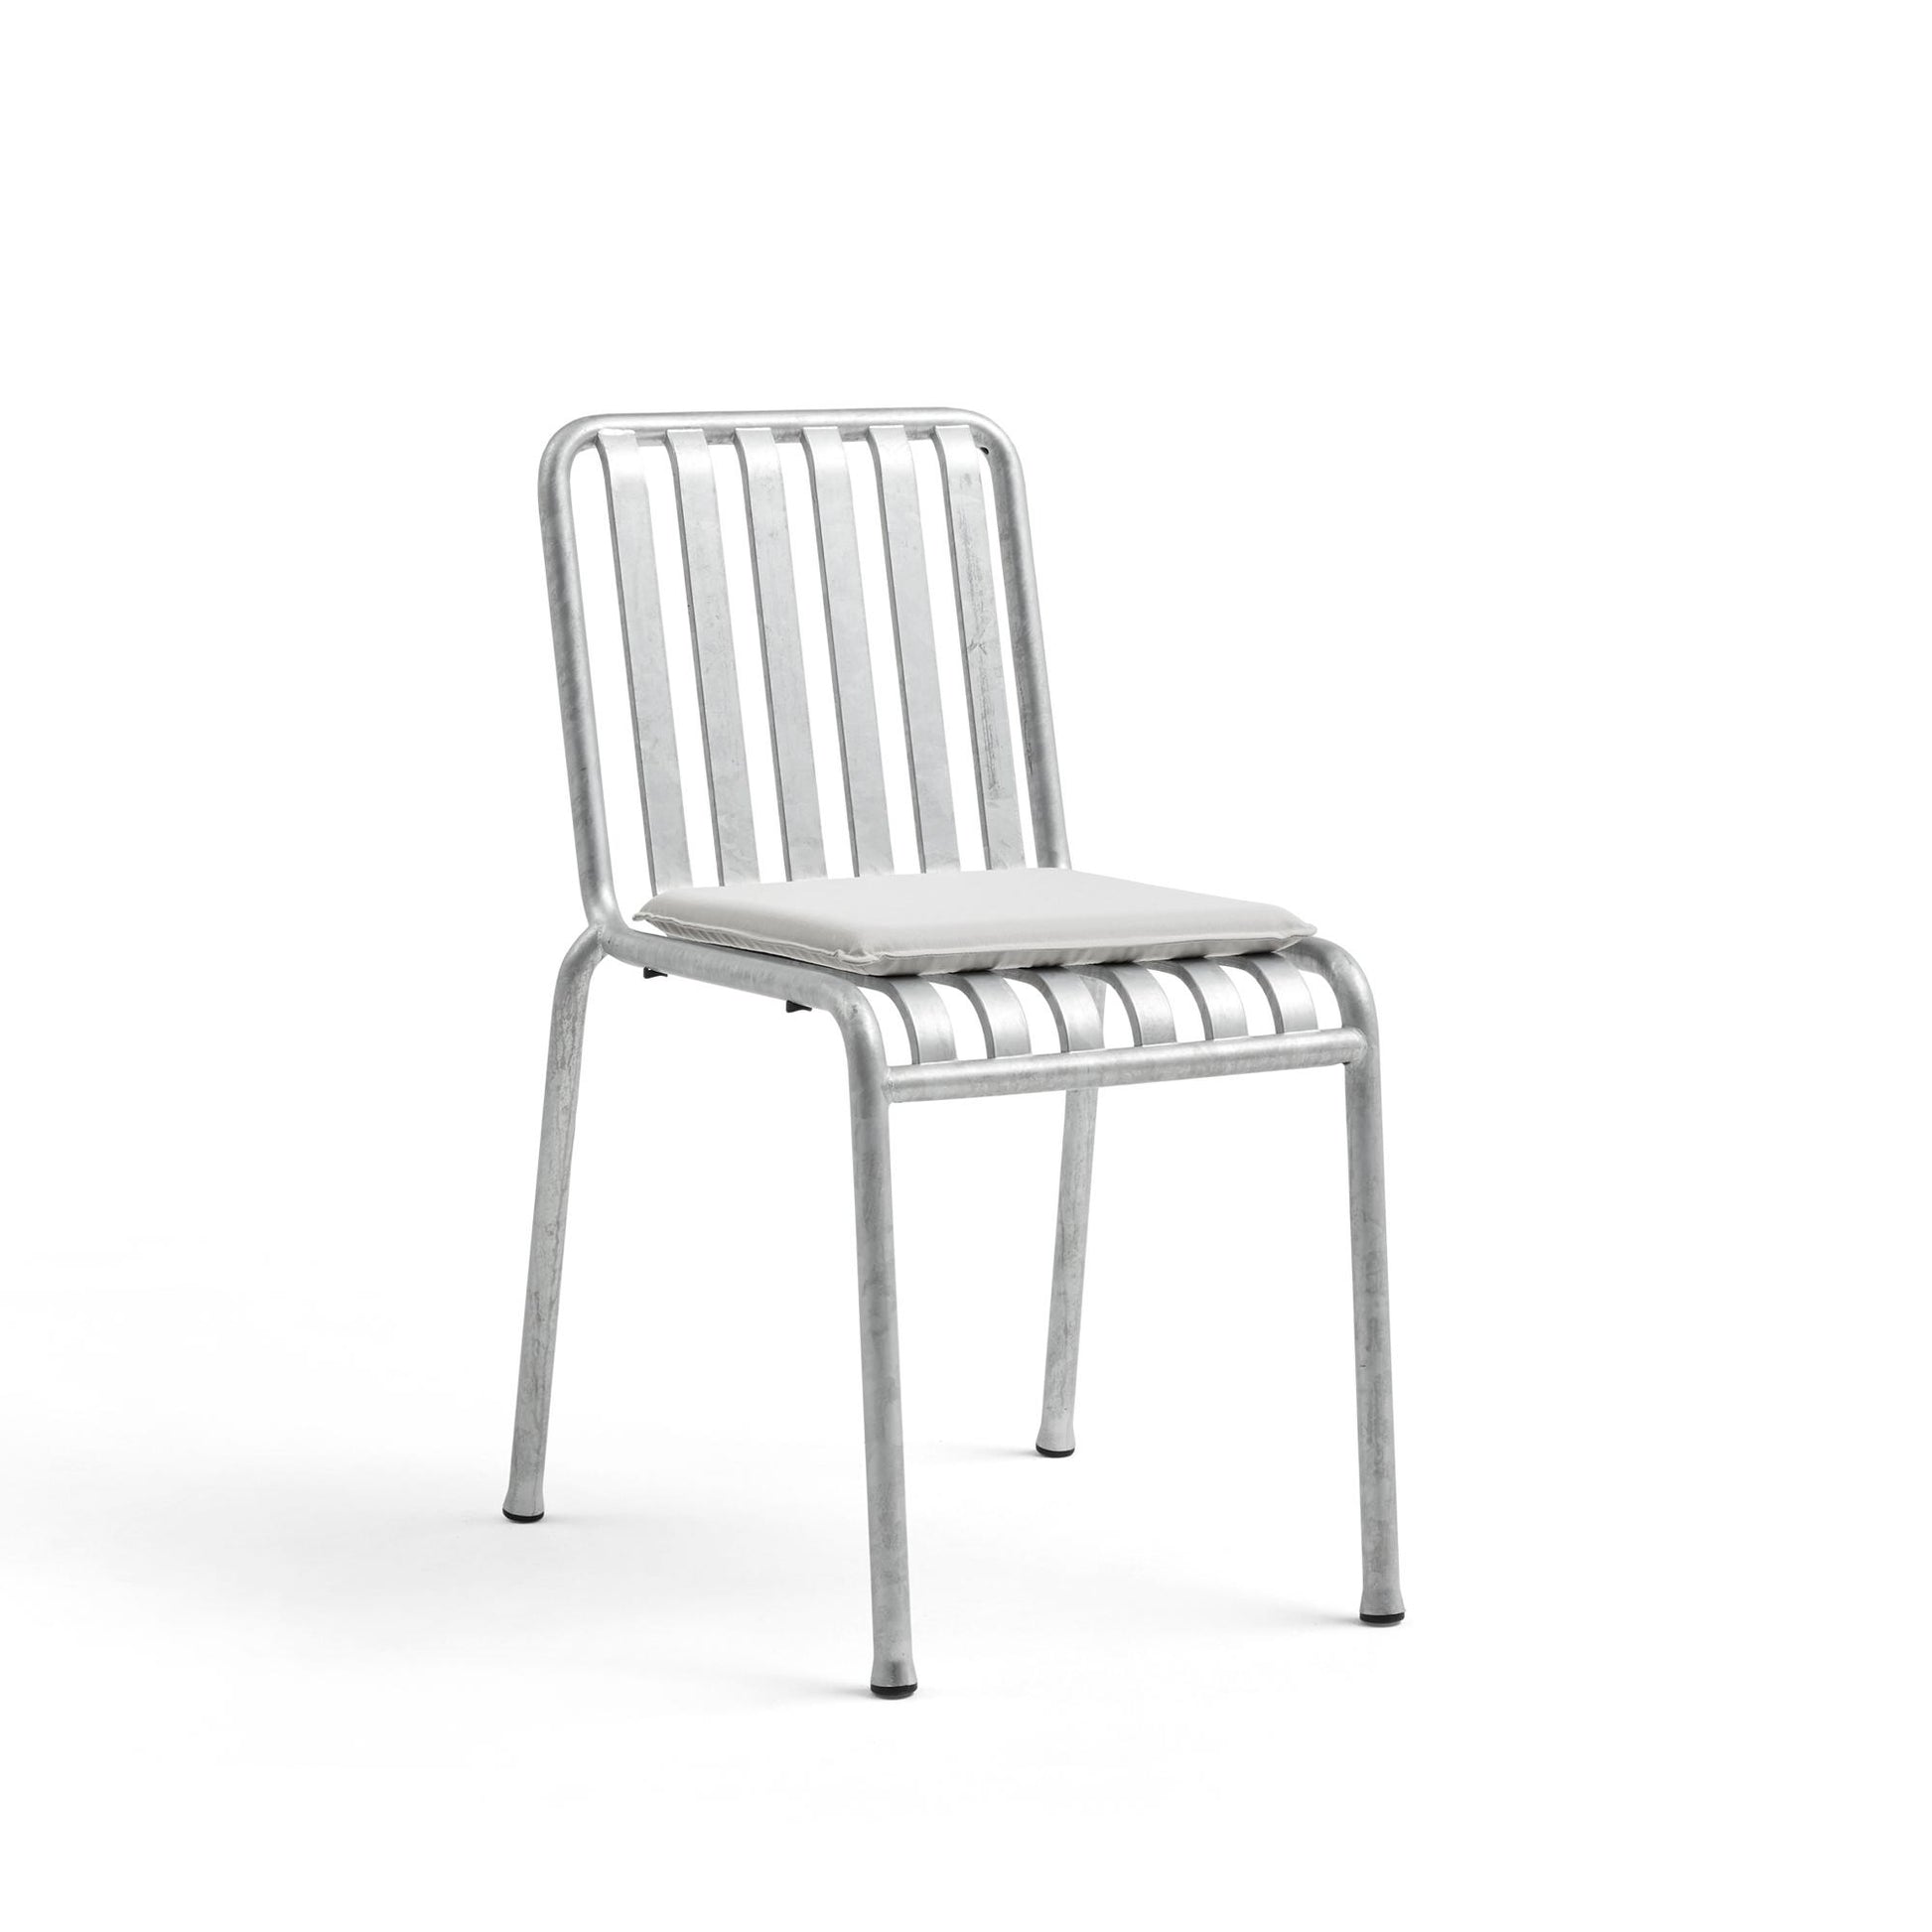 Palissade Chair by HAY #Hot Galvanized Steel